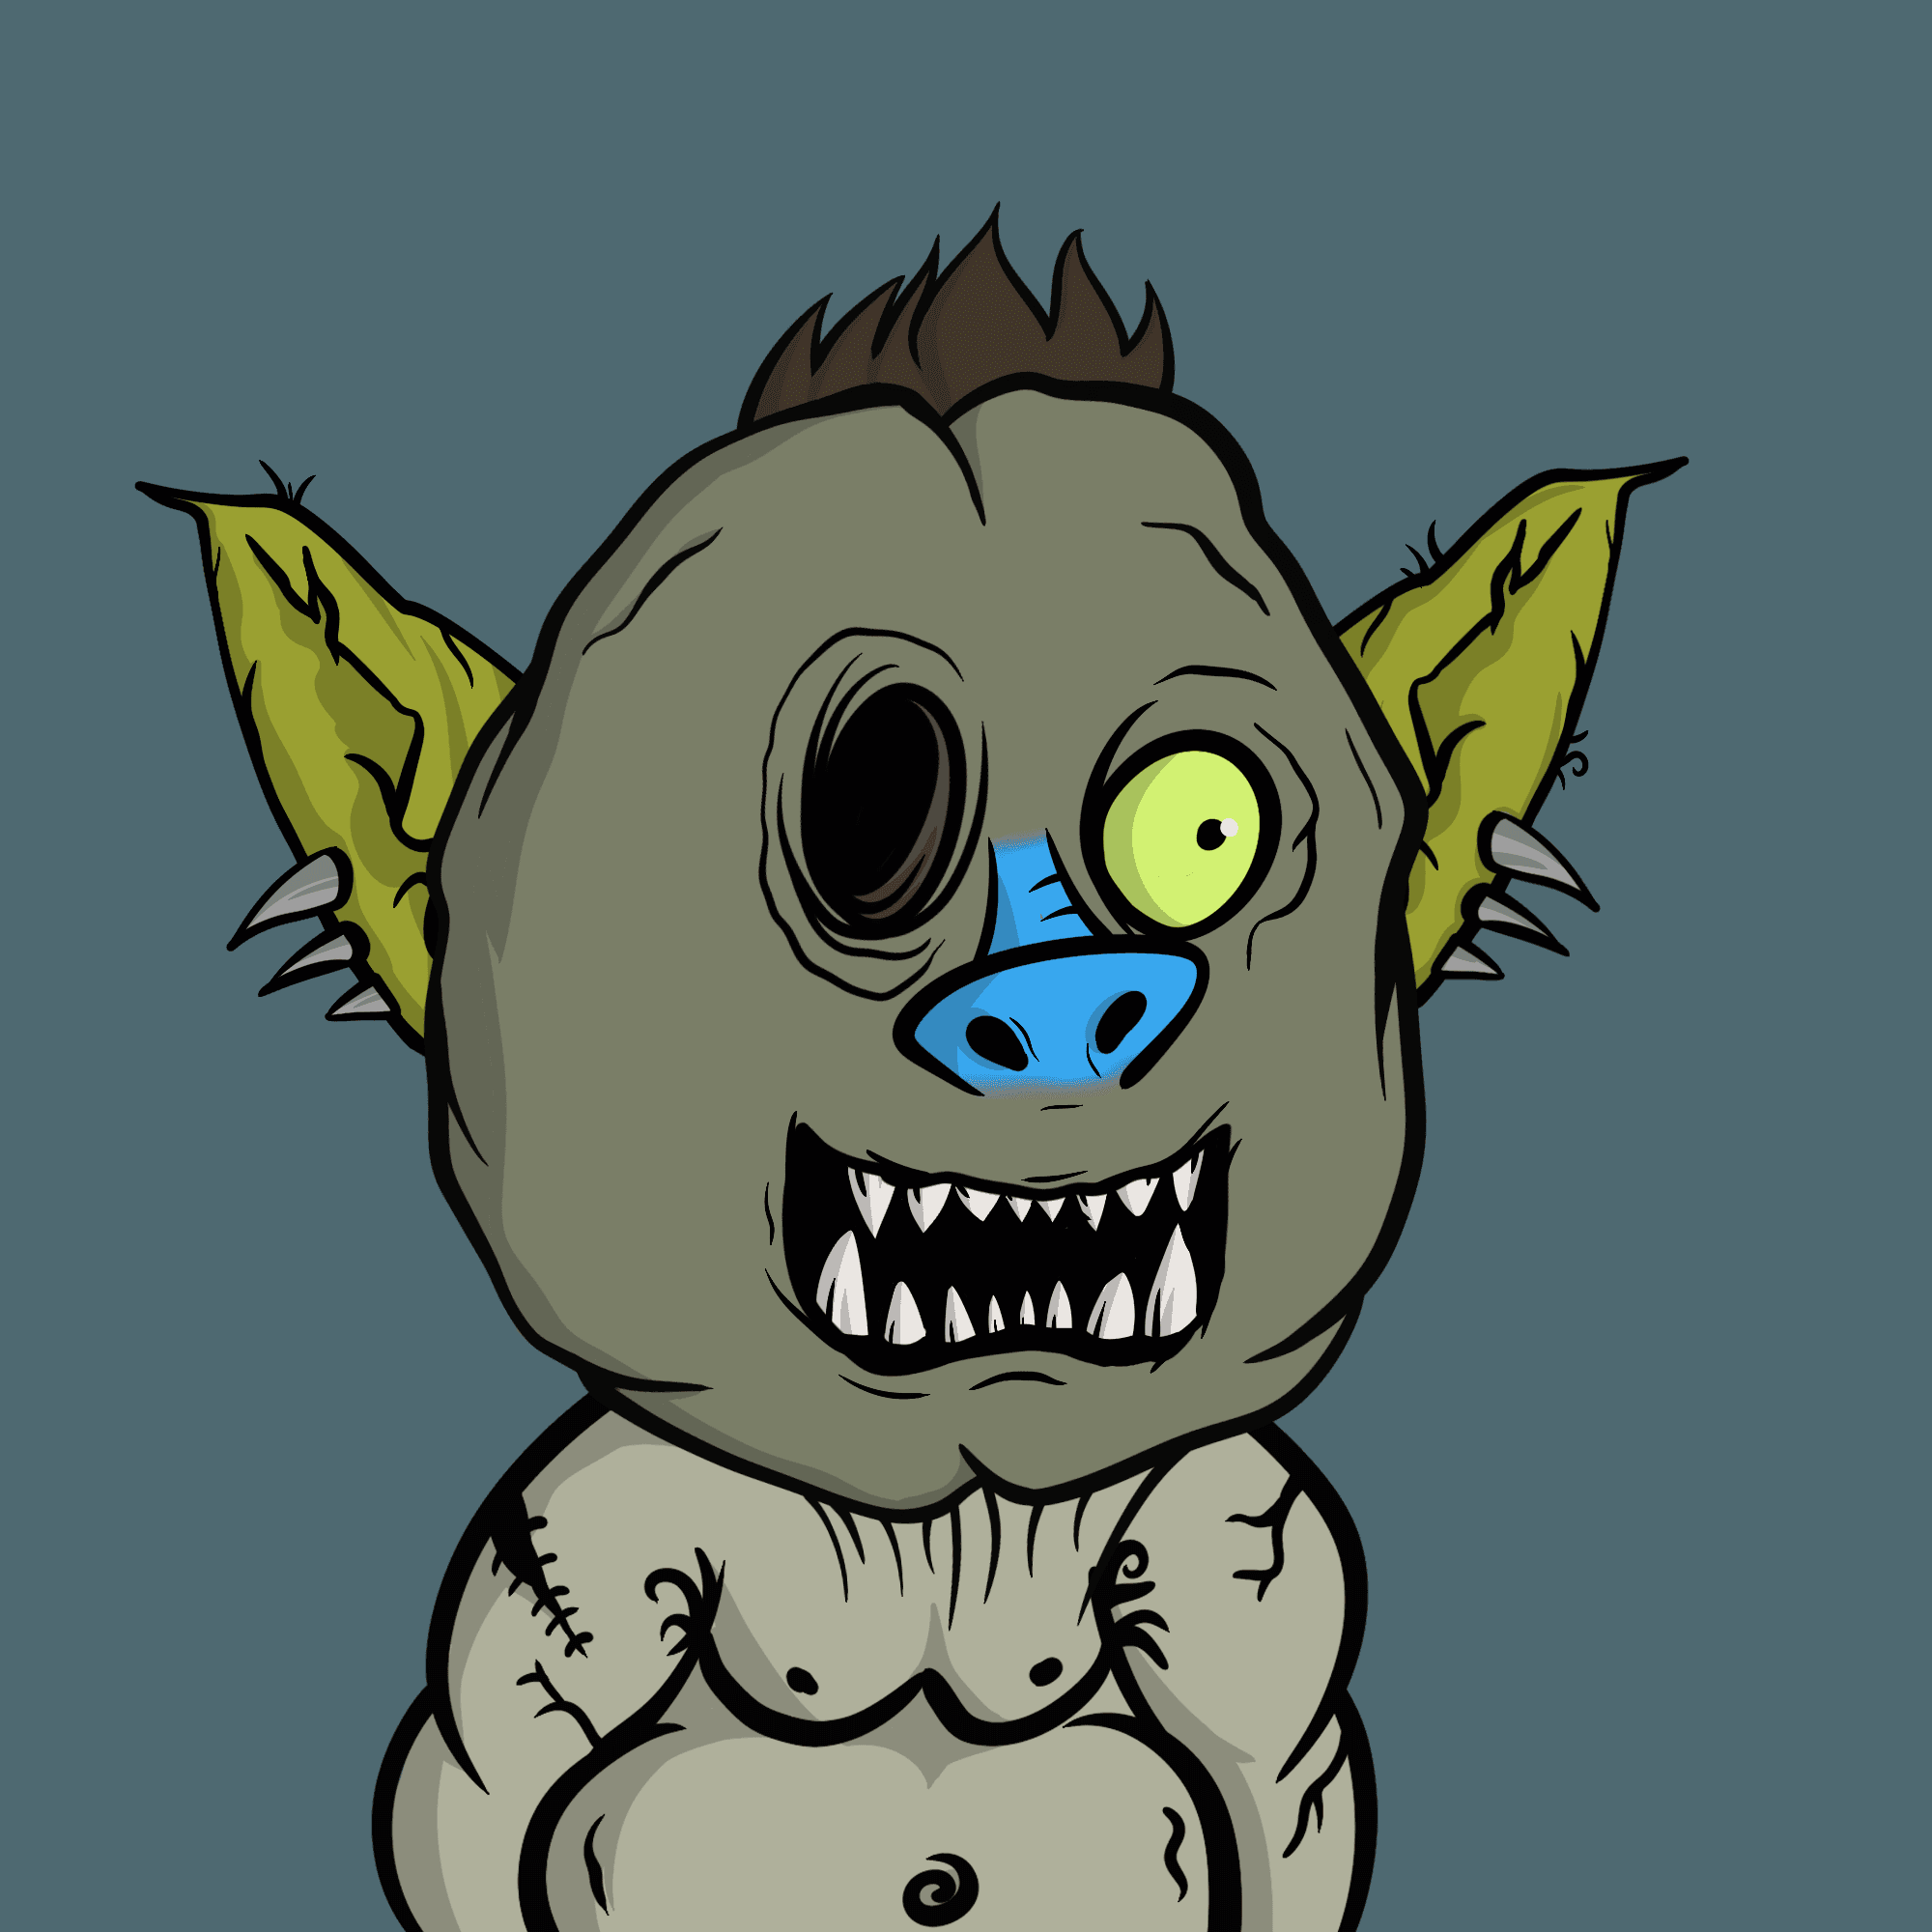 orcswtf #1033